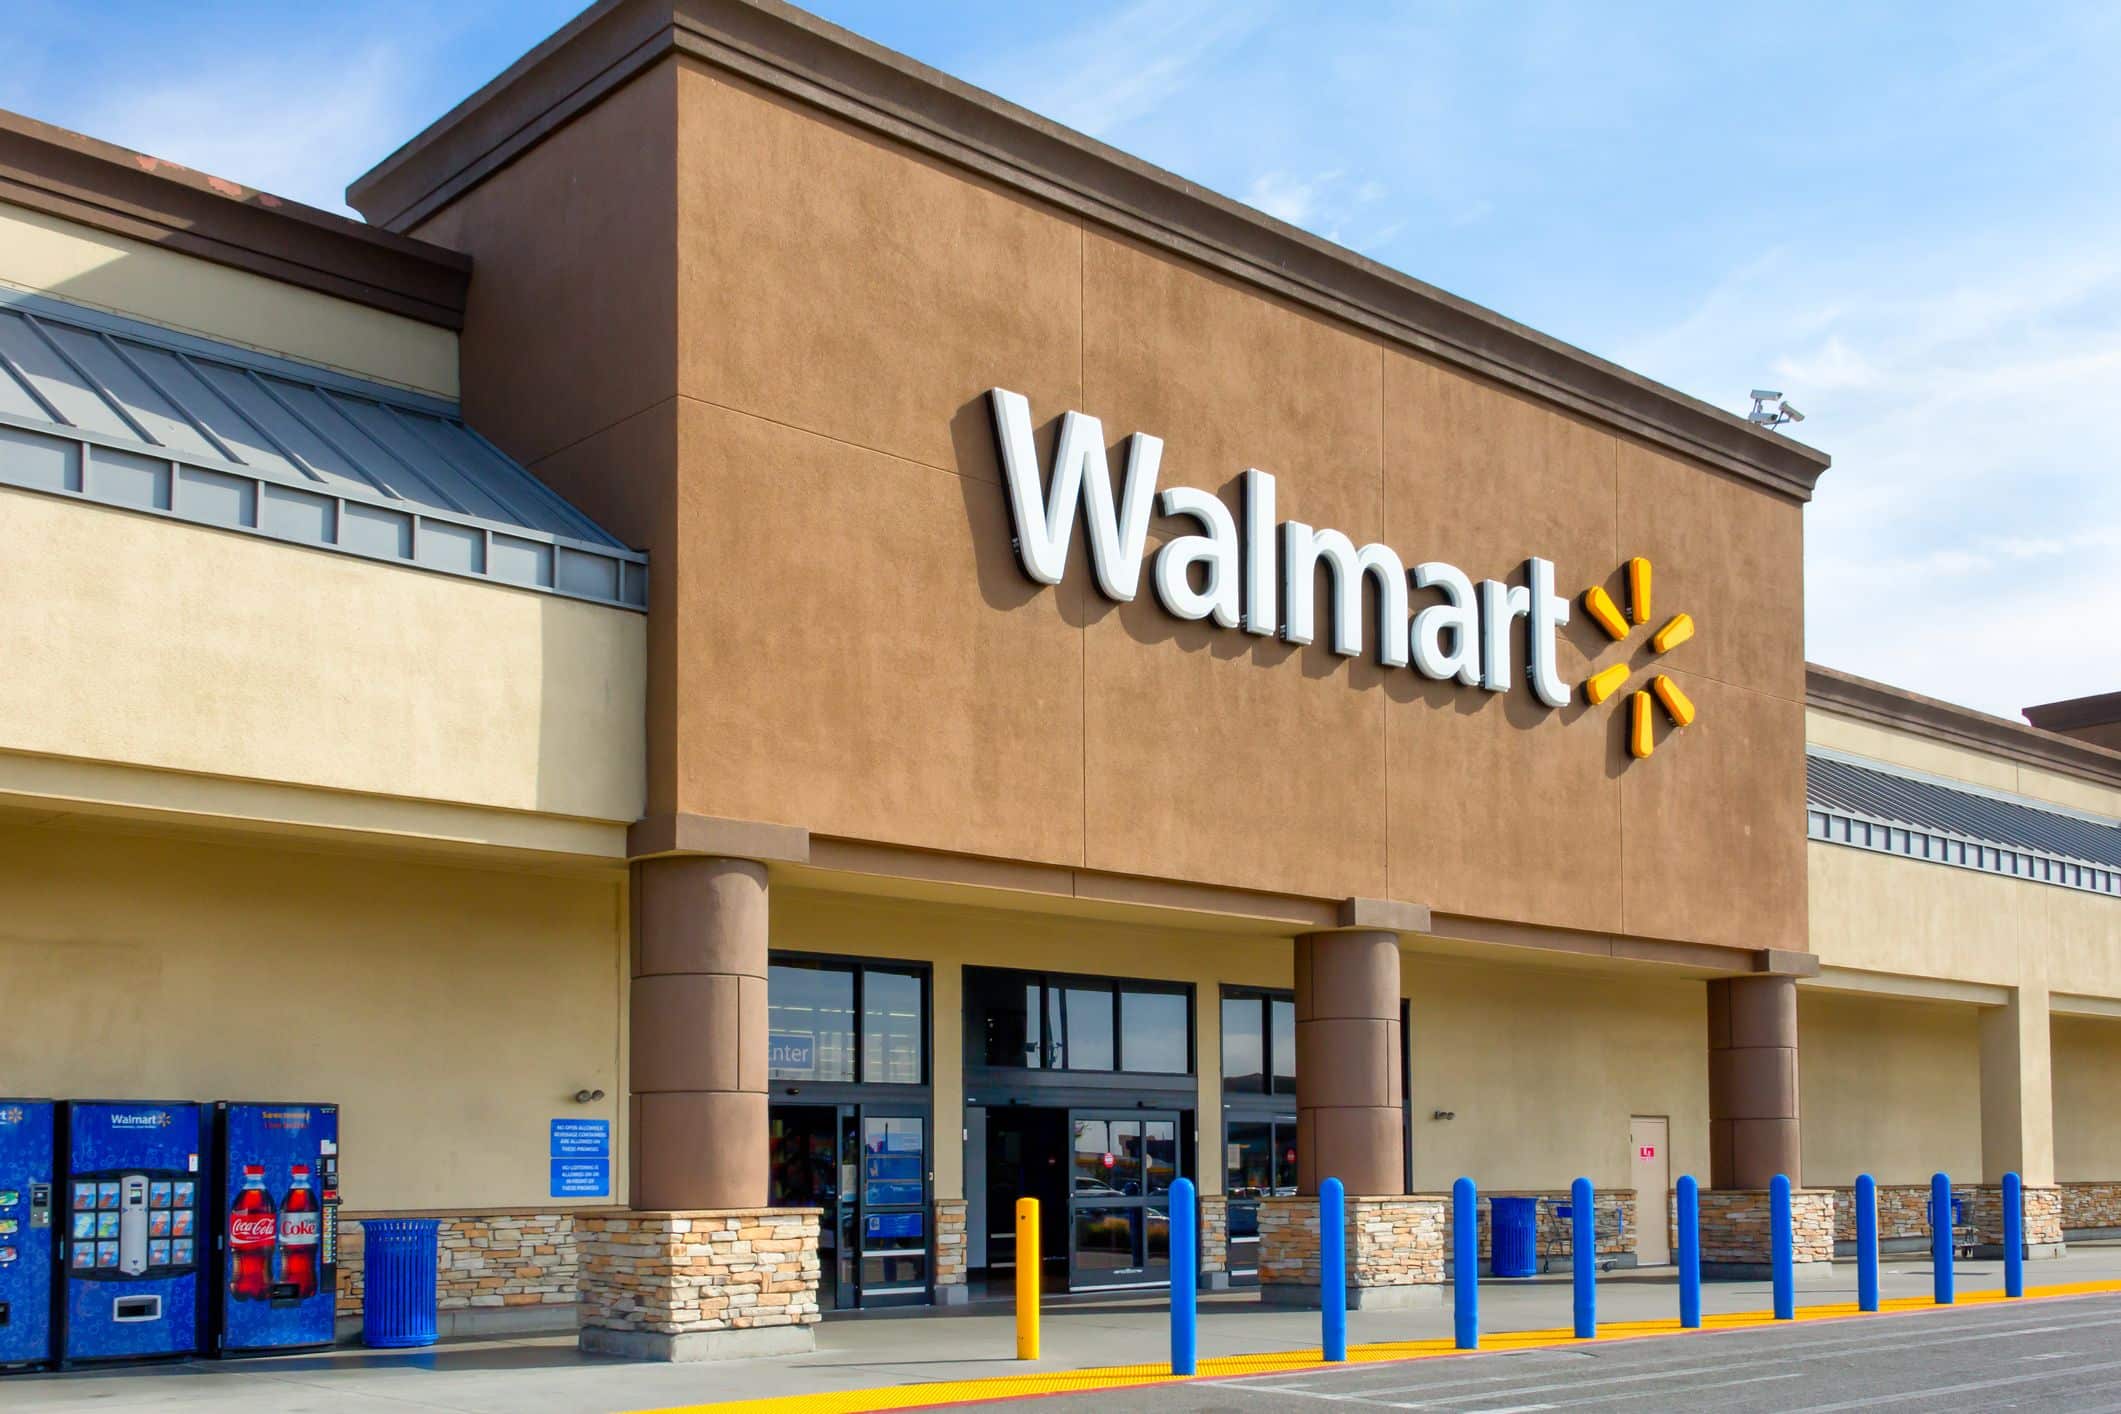 Walmart to boost Indian exports to $10 billion by 2027